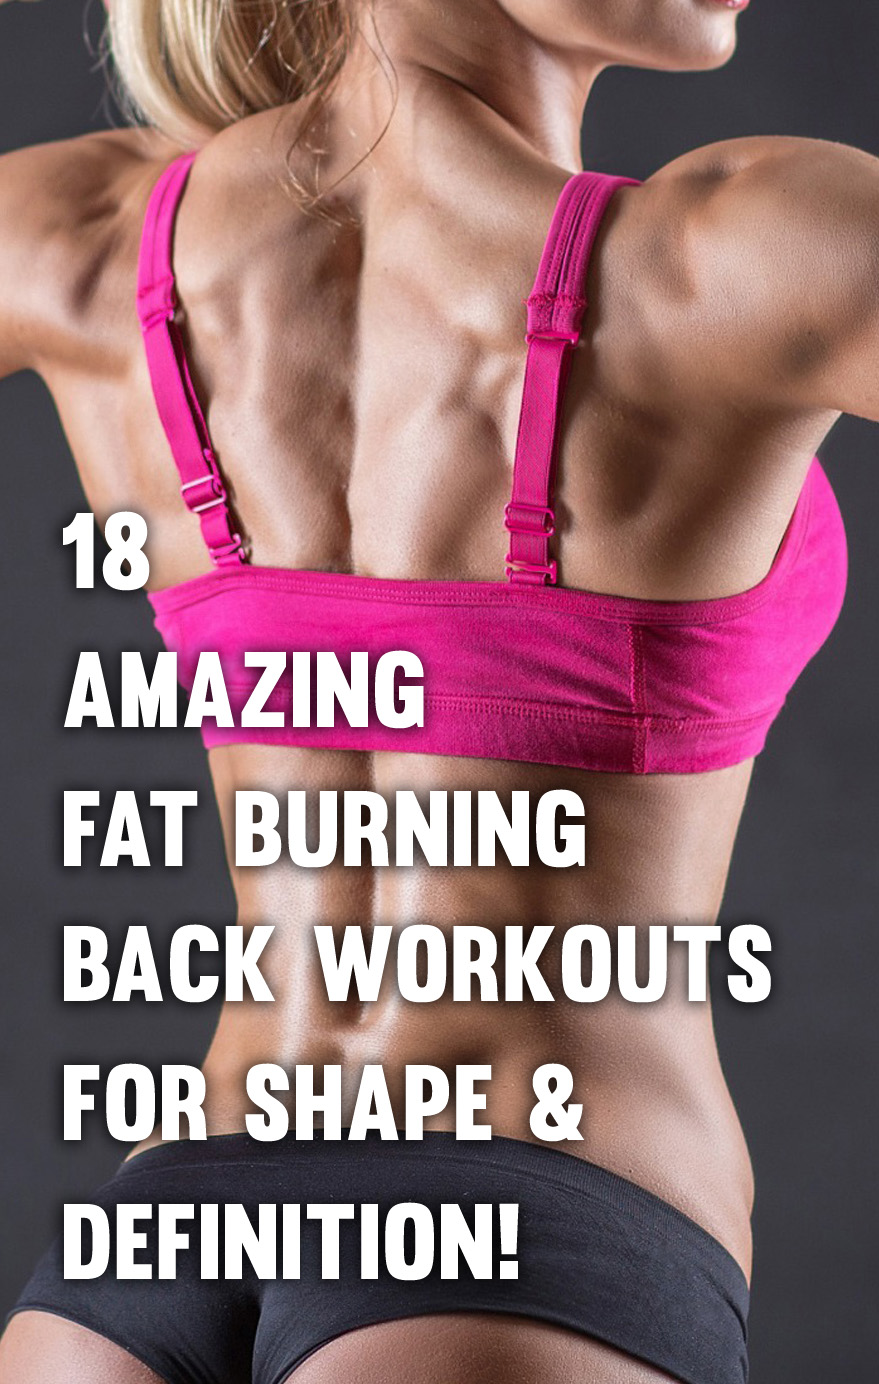 Banish Your Back Fat with this Quick Back Workout for Women